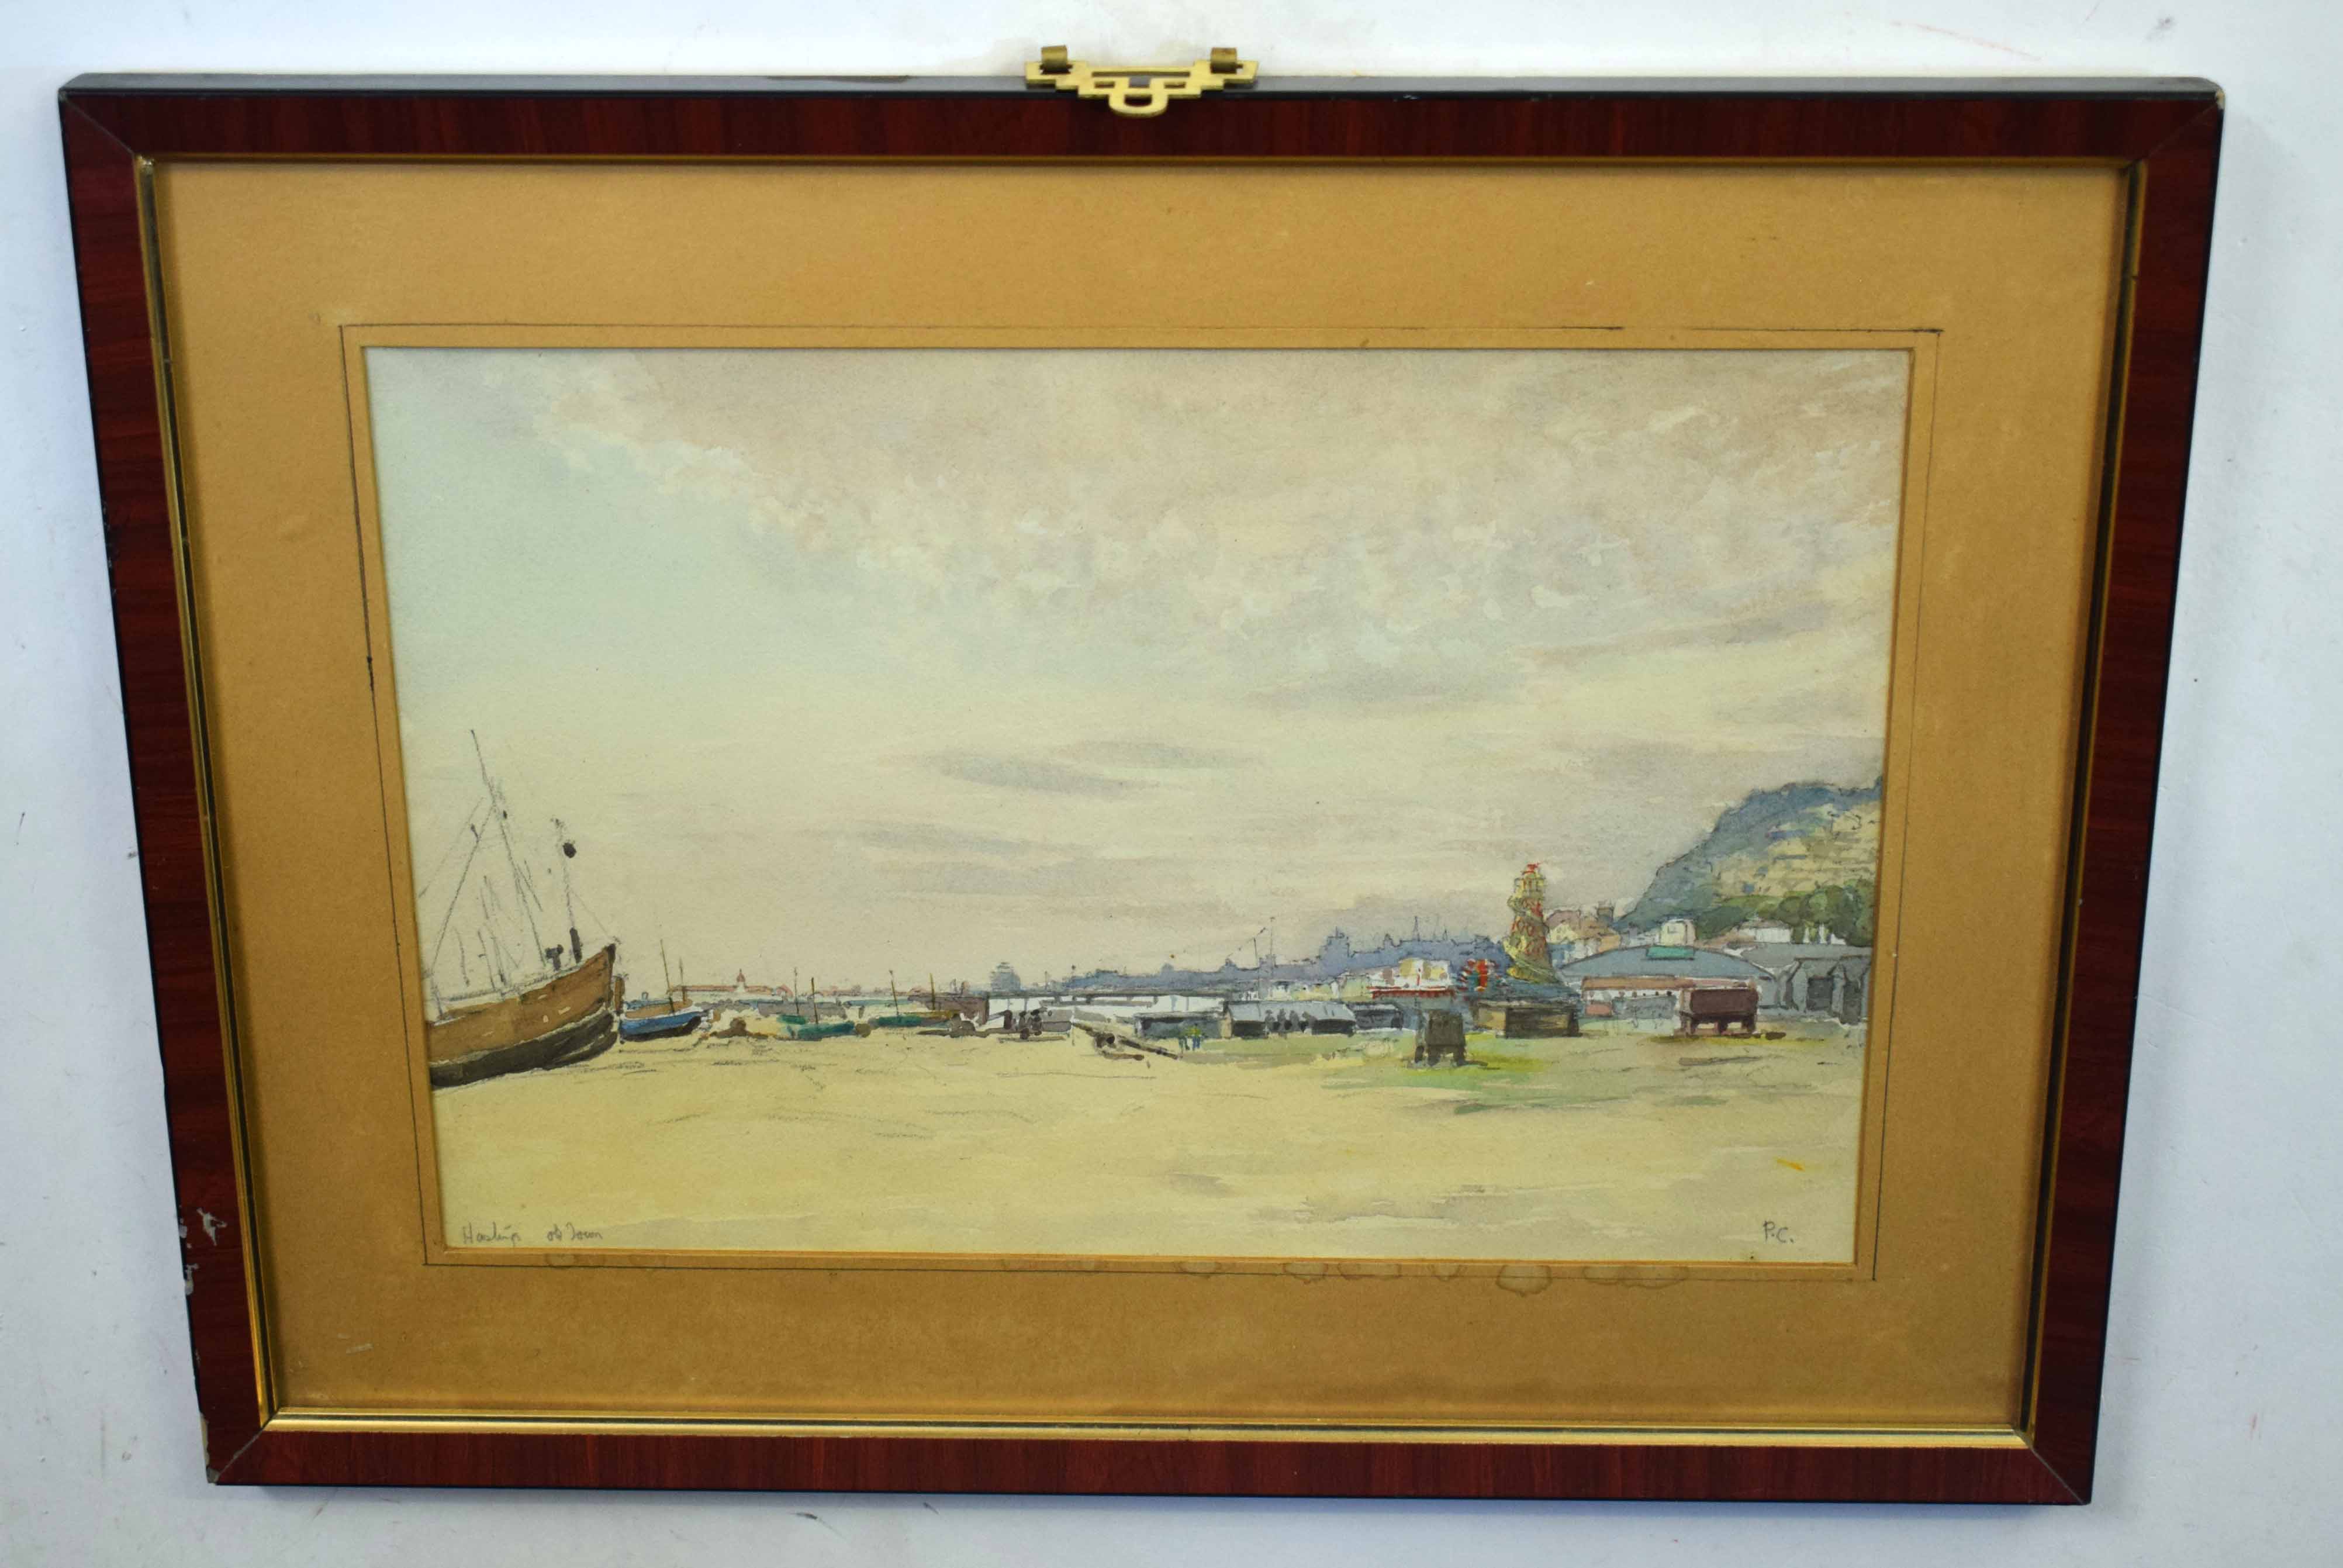 PC, initialled watercolour, inscribed "Hastings Old Town", 25 x 37cm